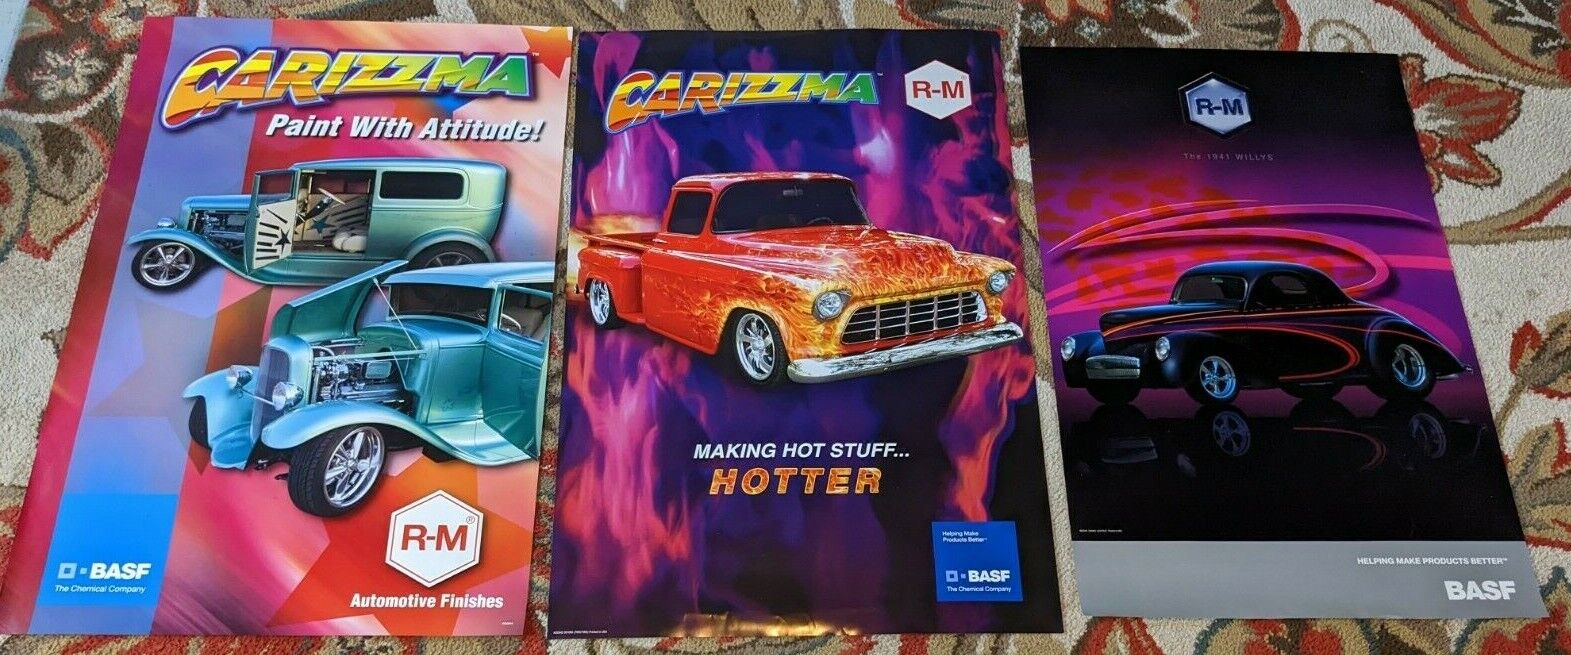 CARIZZMA BASF PROMO Chevy 3100 - 1941 Willys AUTO PAINT POSTER Set